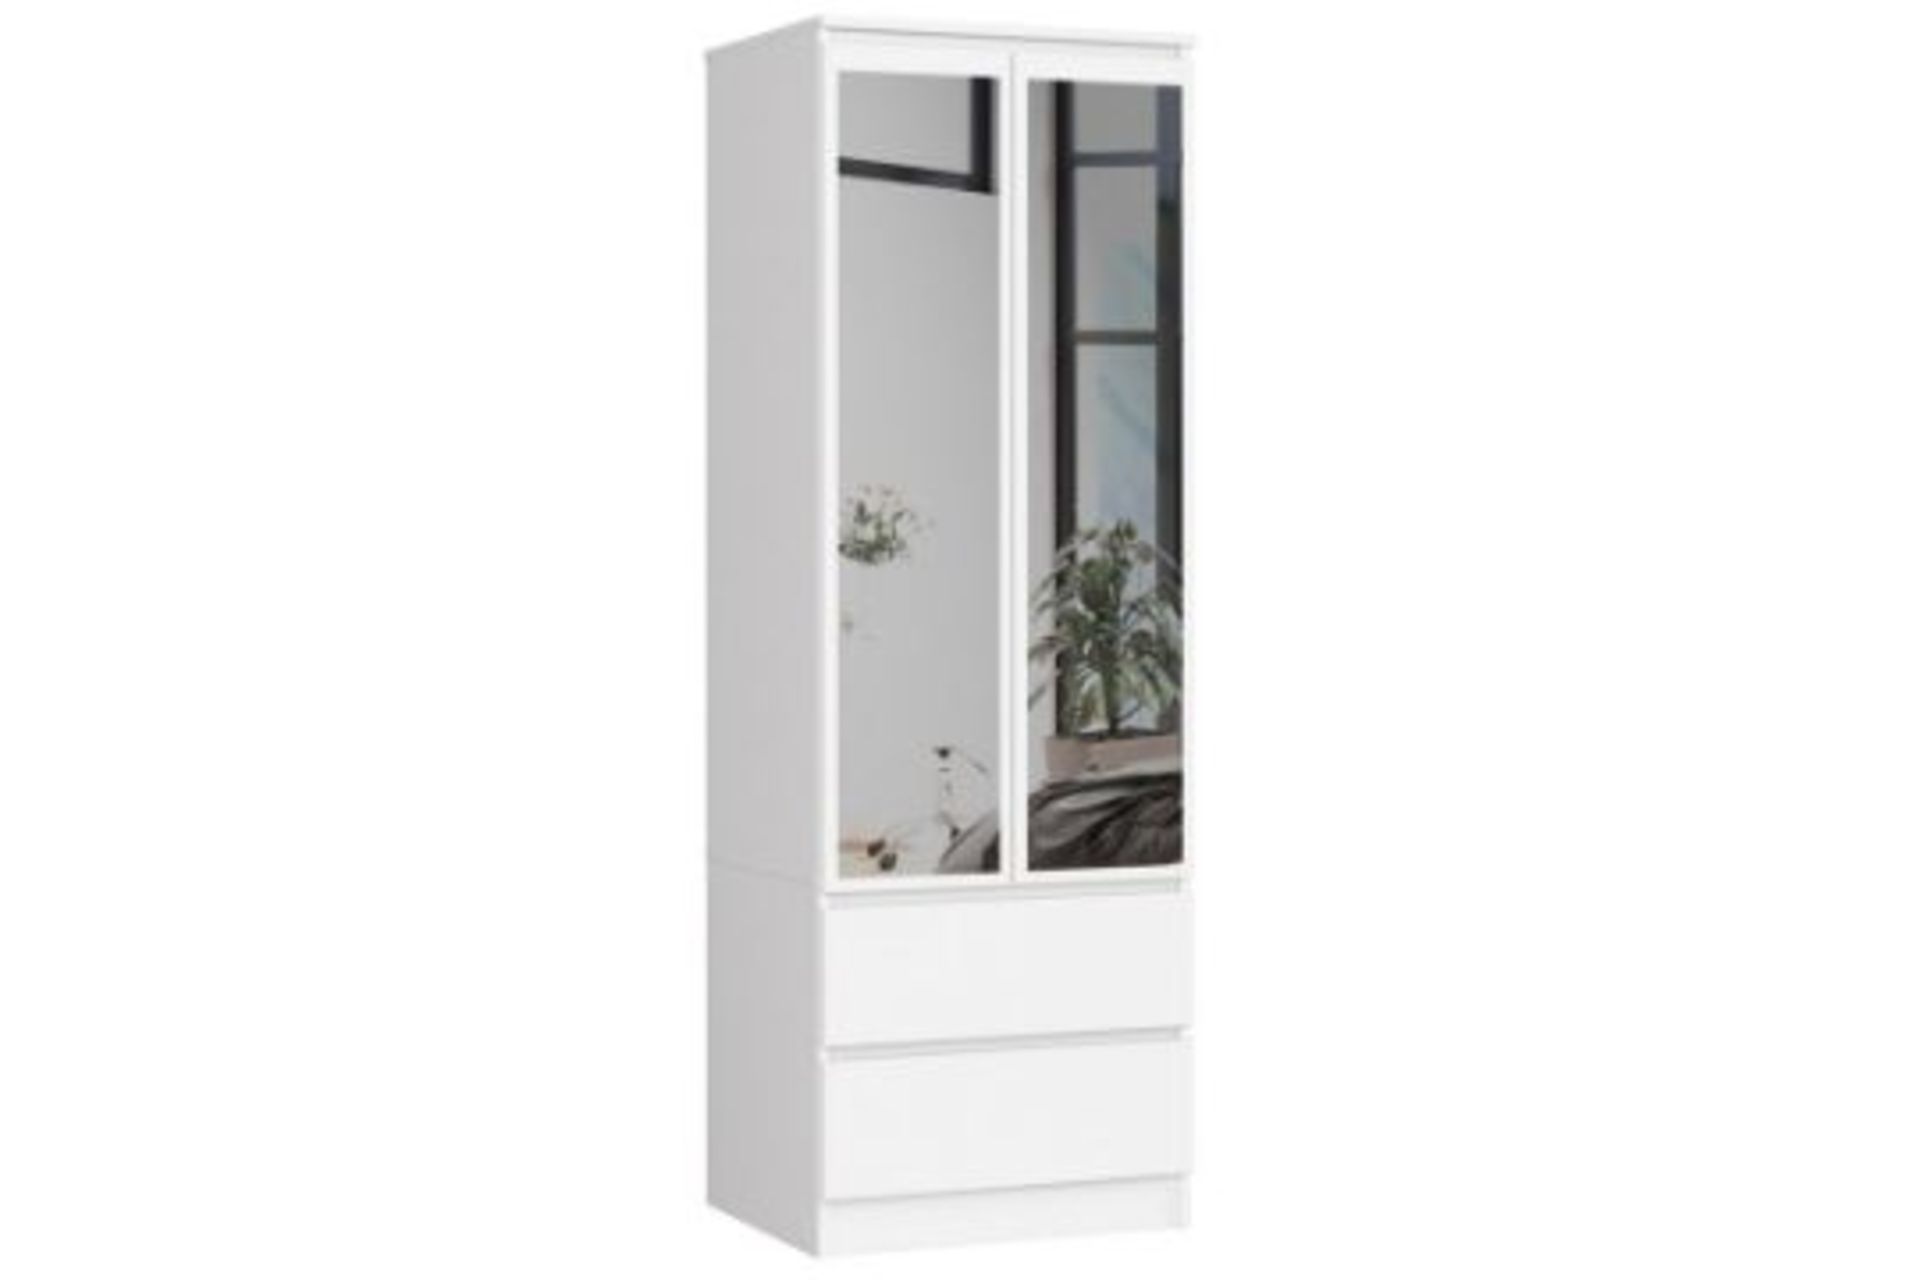 Alexsey 2 Door Wardrobe - RRP £599.99 COLLECTION ONLY